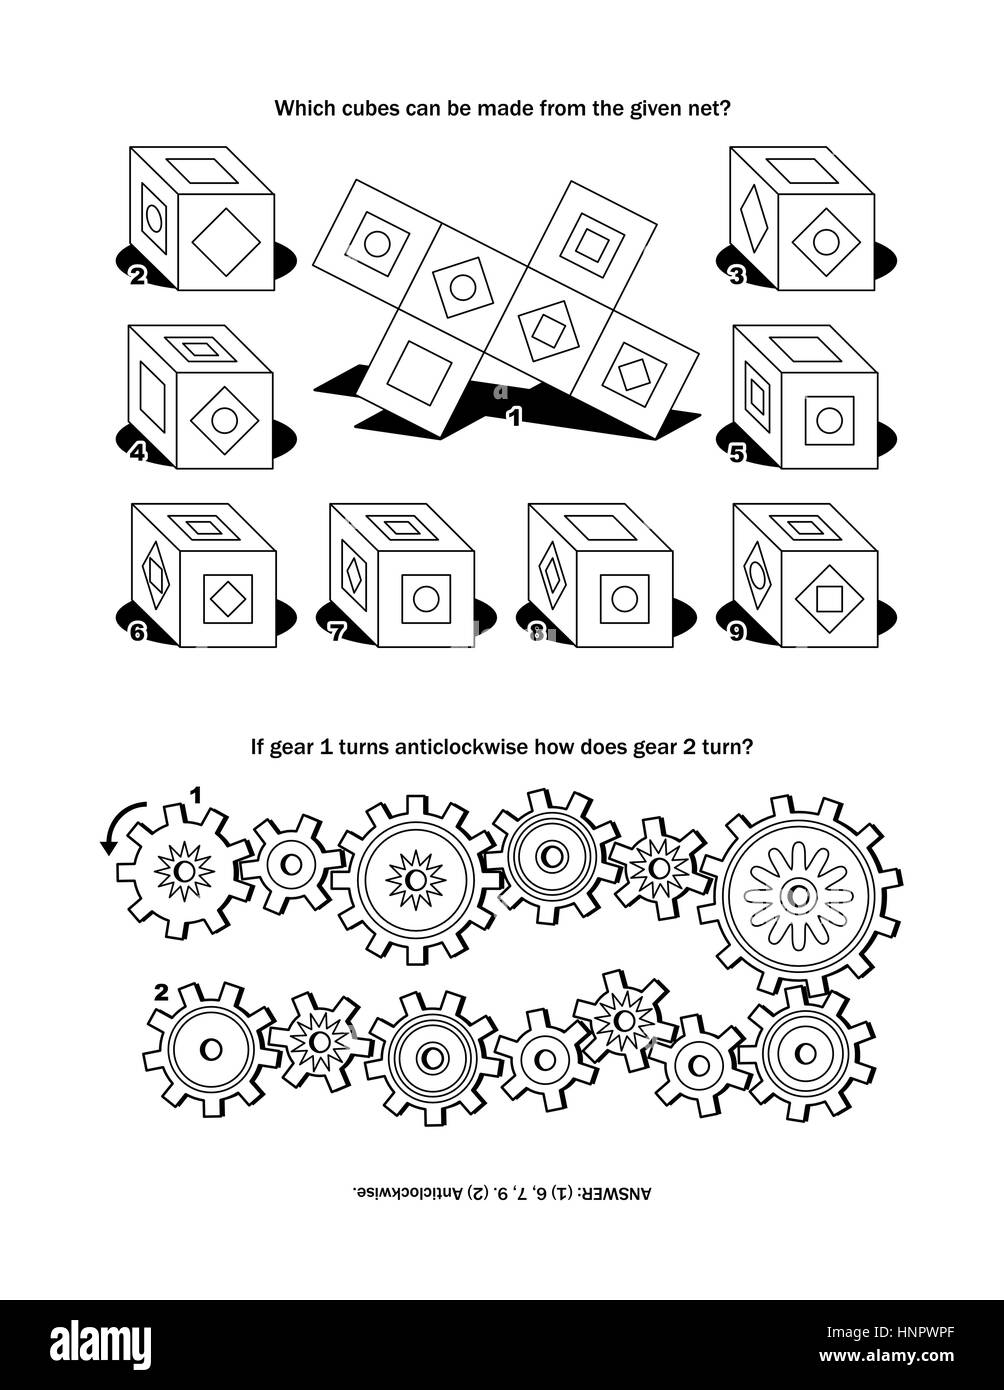 Puzzle page with two puzzles: Which cubes can be made from the given net? If gear 1 turns anticlockwise how does gear 2 turn? Answer included. Stock Vector